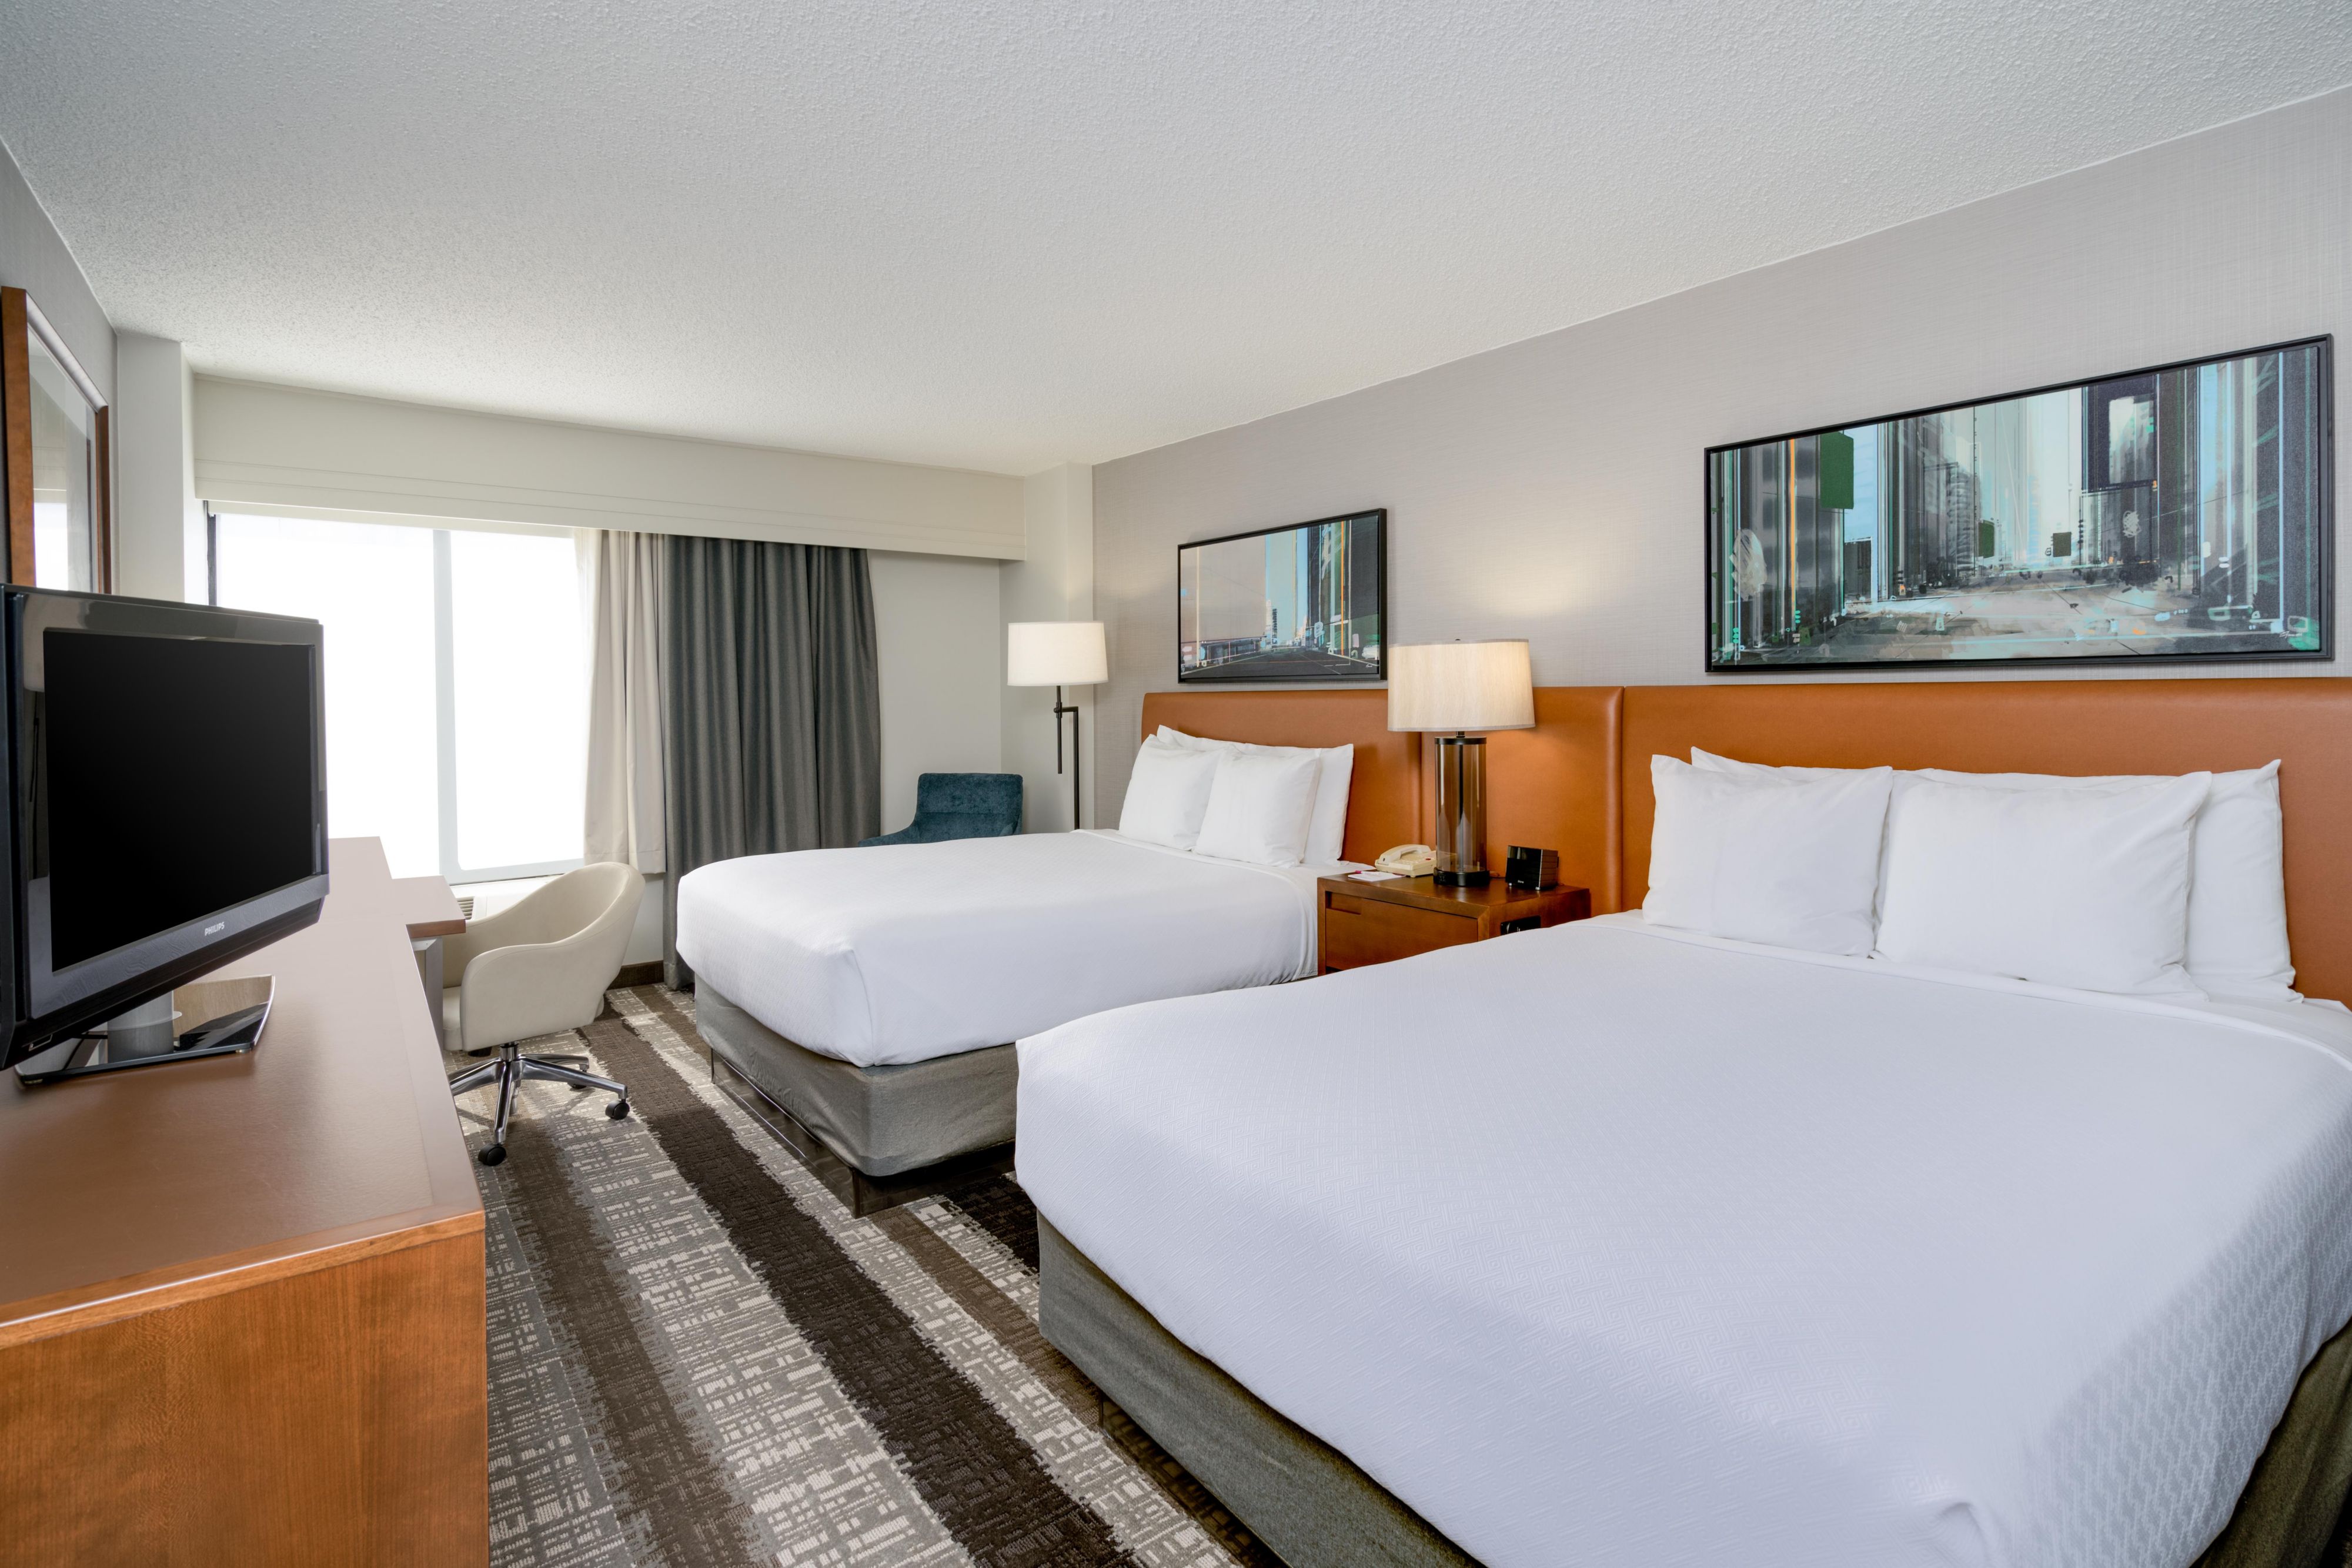 Our Double rooms have Queen size beds for your comfort.